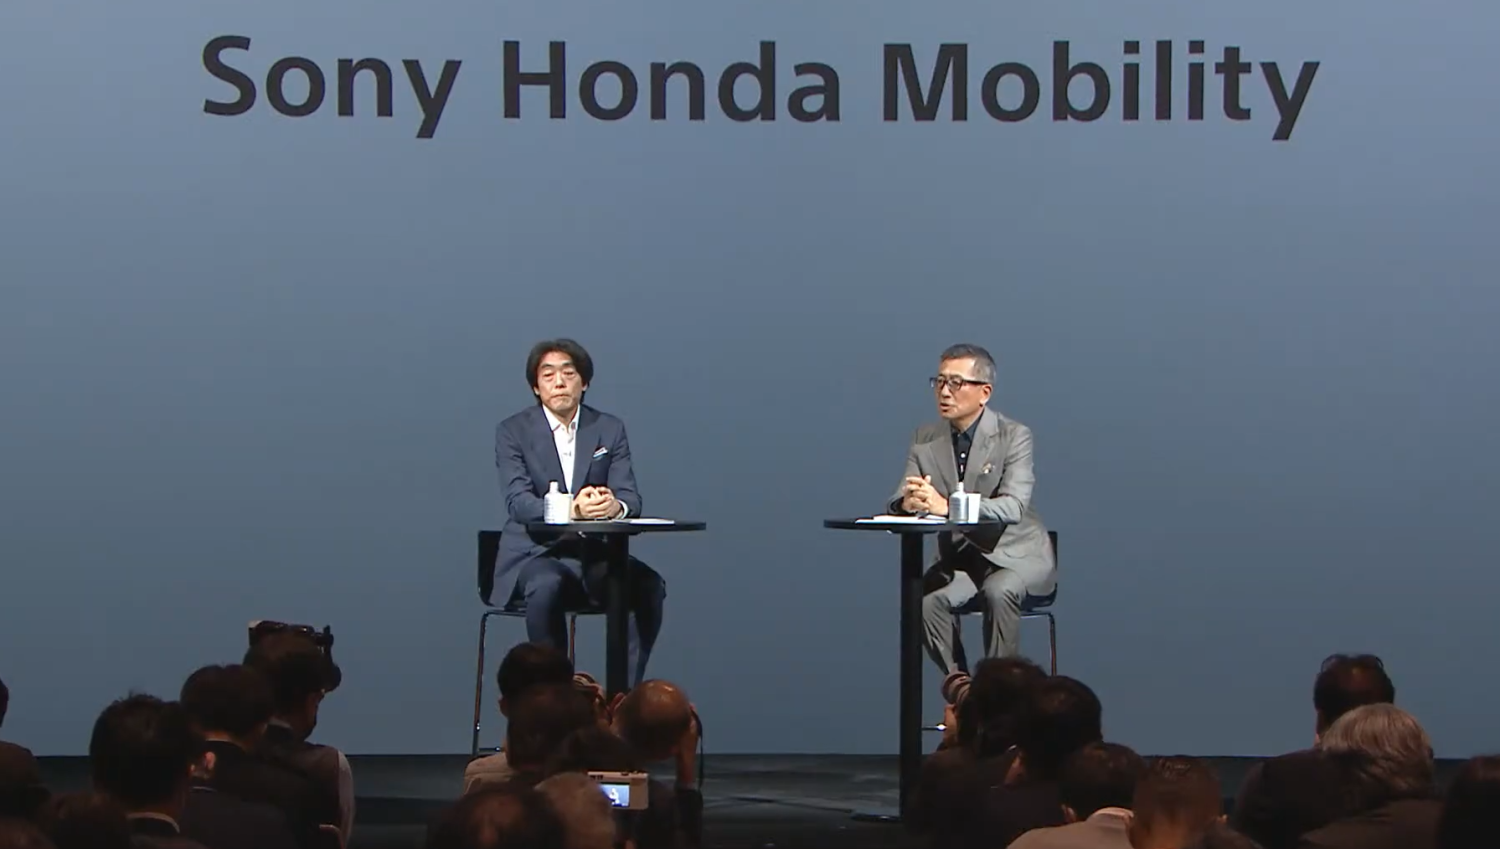 Sony Honda working together to produce EVs in North America real soon